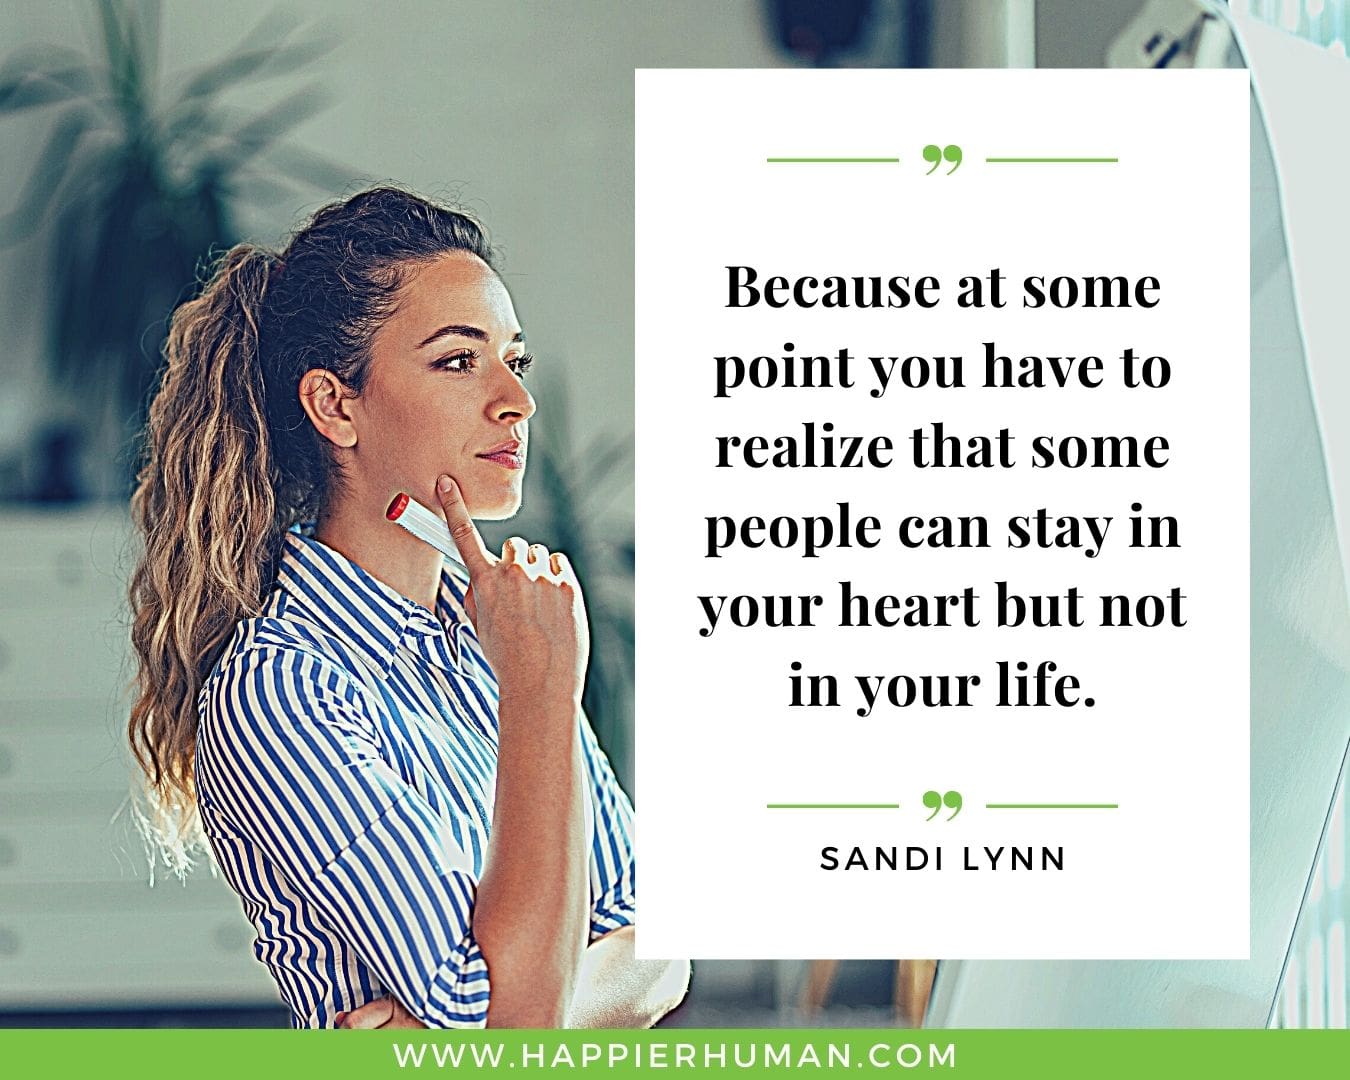 Toxic People Quotes - “Because at some point you have to realize that some people can stay in your heart but not in your life.” – Sandi Lynn